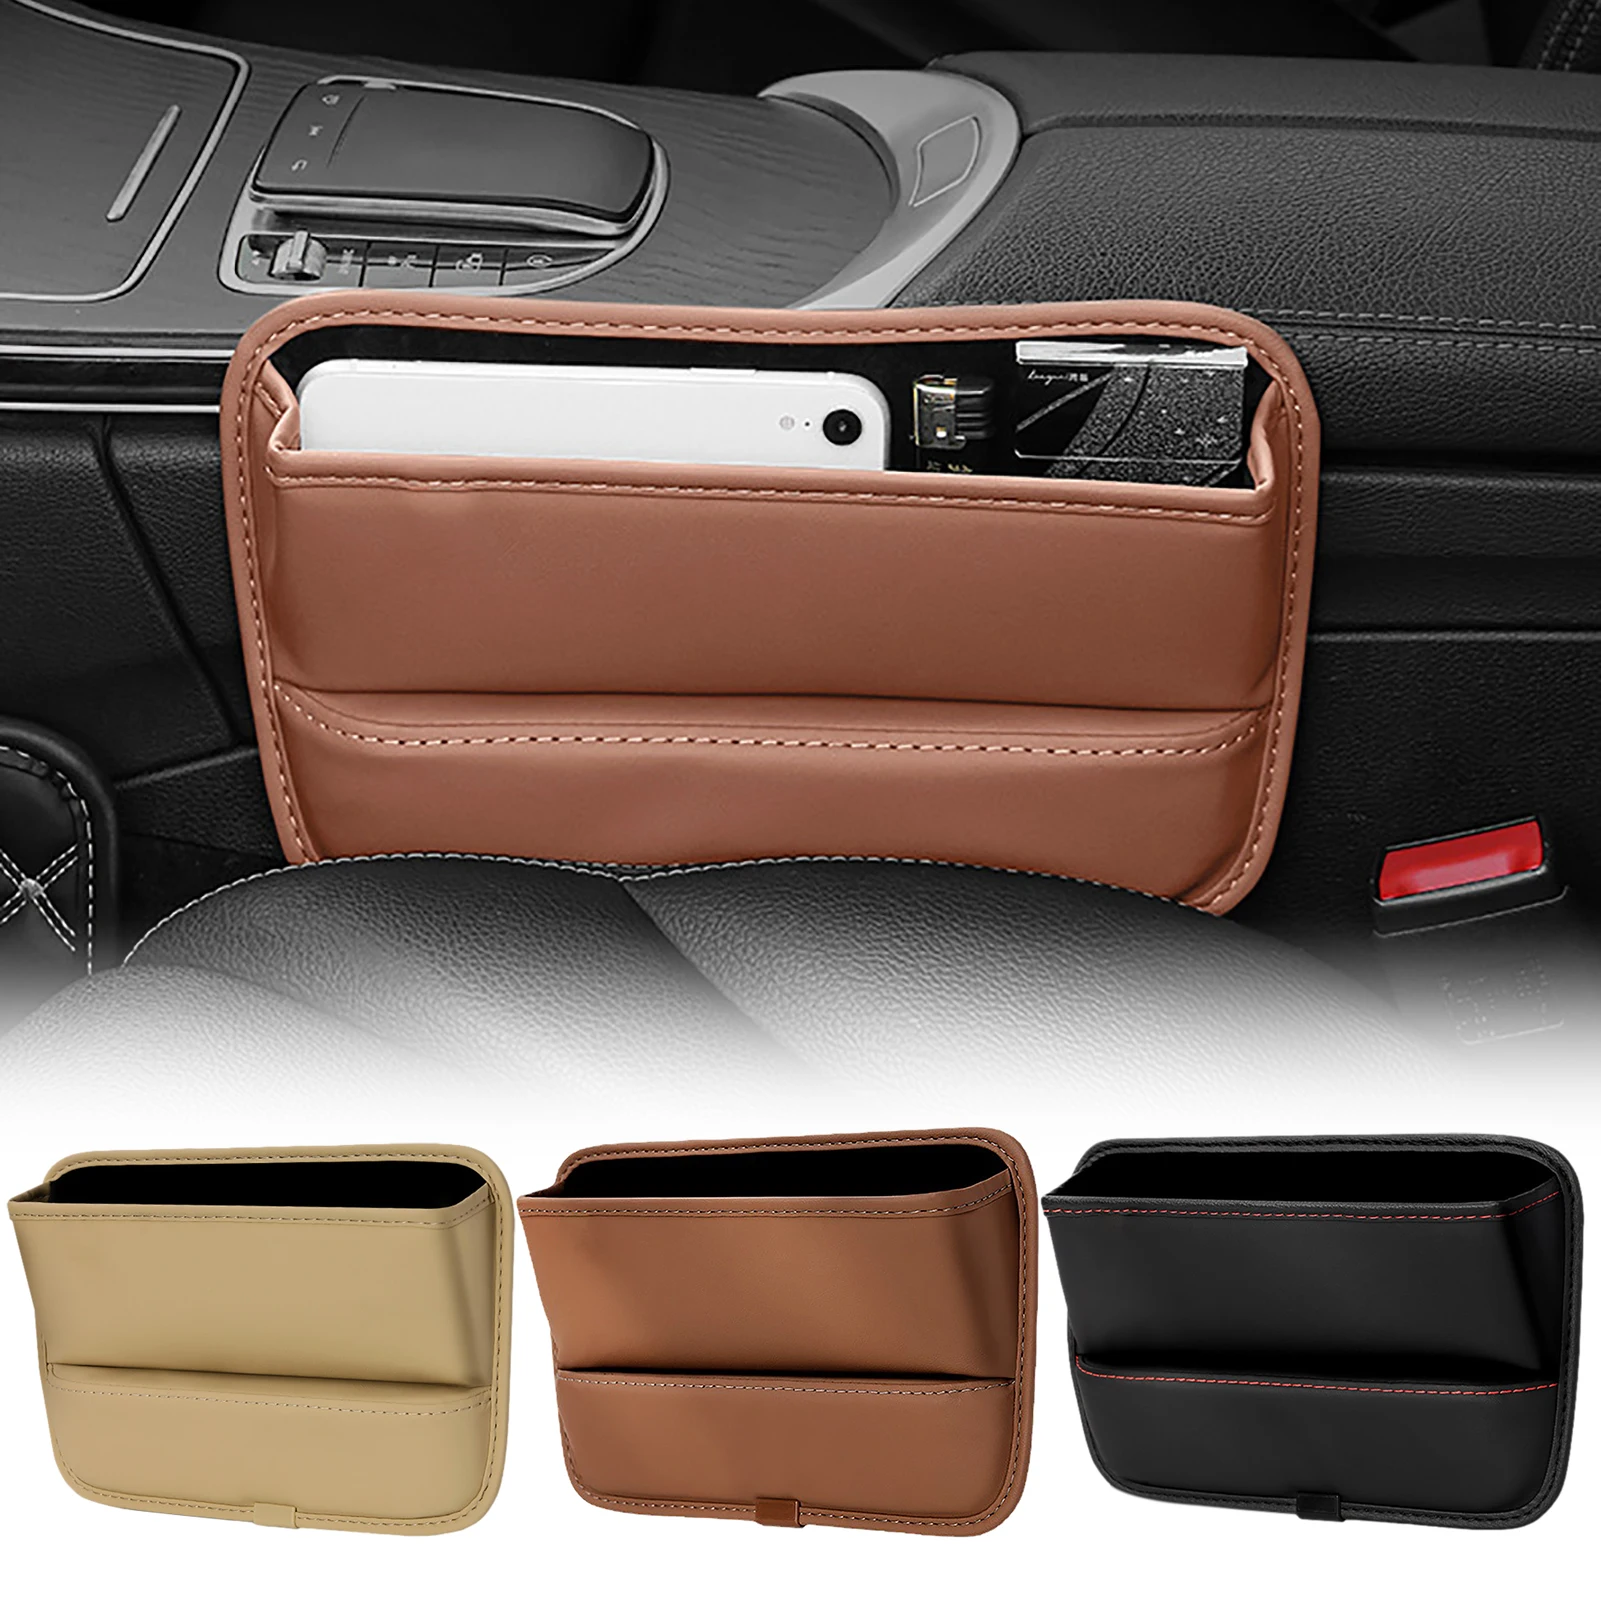 NEW POWER Premium PU Leather Side Pocket Organizer Car Seat Filler Gap Space Storage Box Bottle Cup Holder Coin Collector Car Interior Accessories 2PCS Brown 